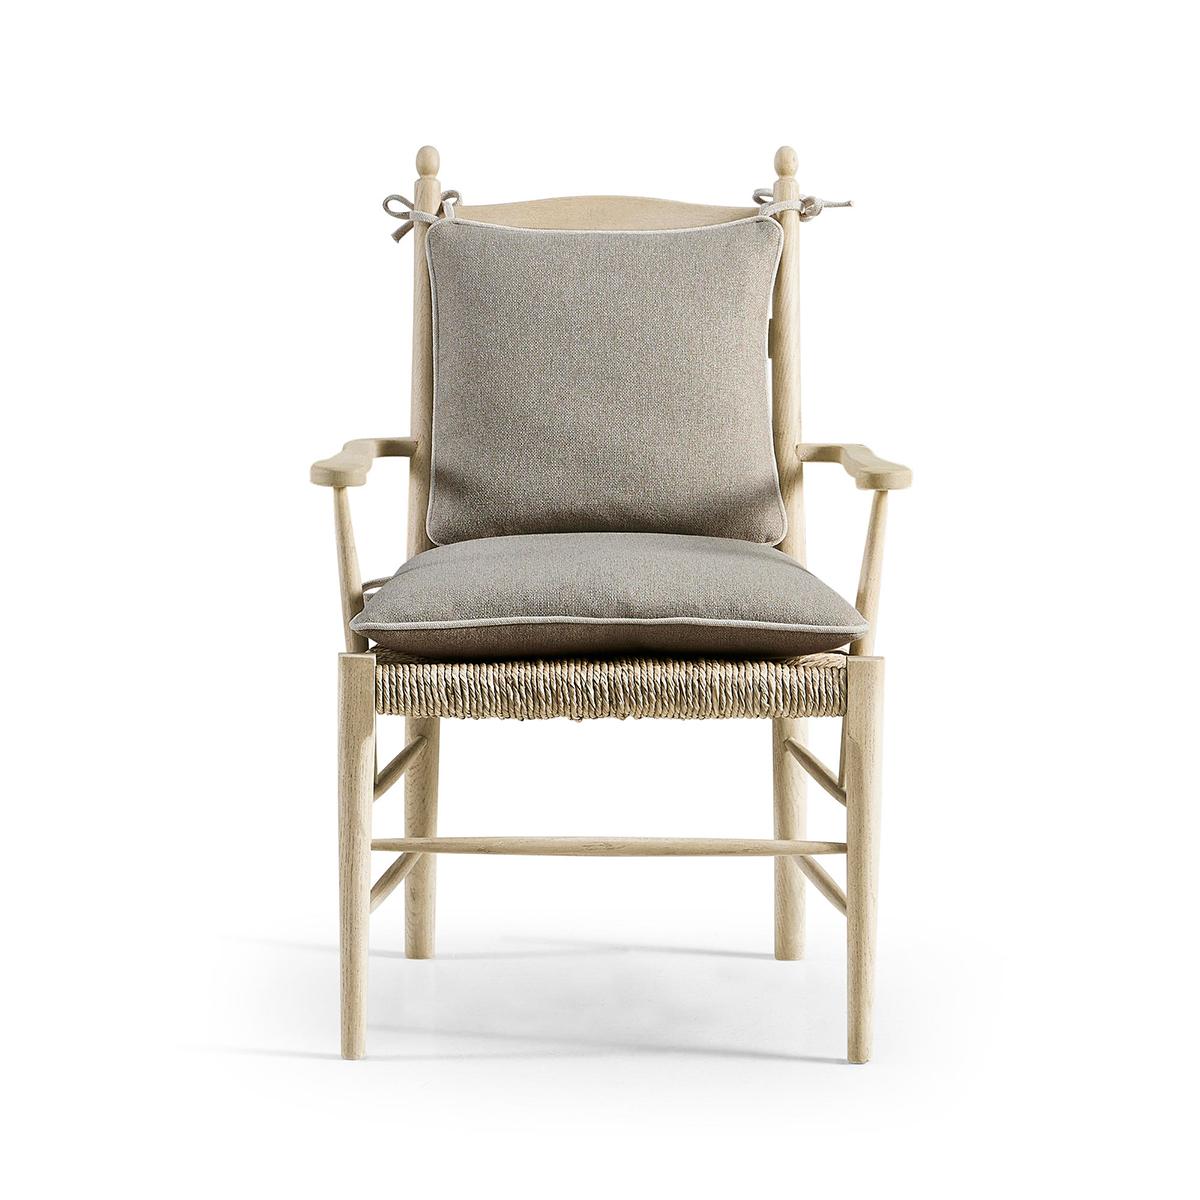 Contemporary French Ladderback Arm Chairs For Sale